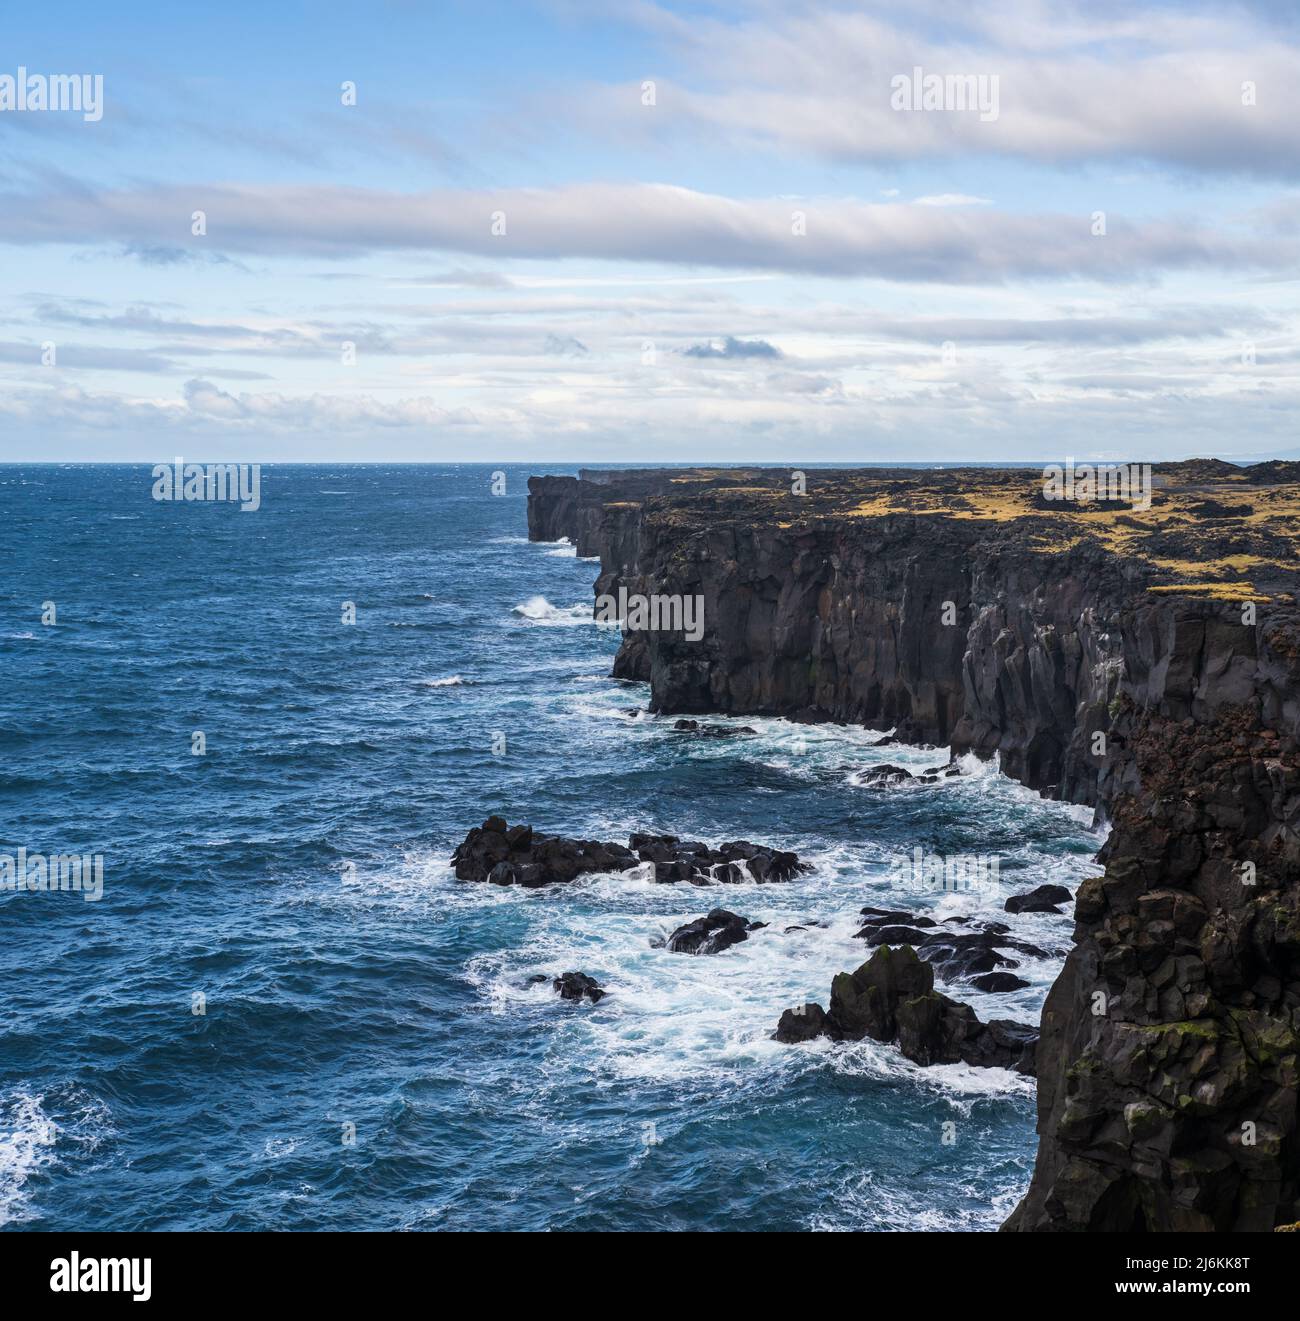 View during auto trip in East Iceland, Snaefellsnes peninsula, View Point near Svortuloft Lighthouse. Spectacular black volcanic rocky ocean coast wit Stock Photo